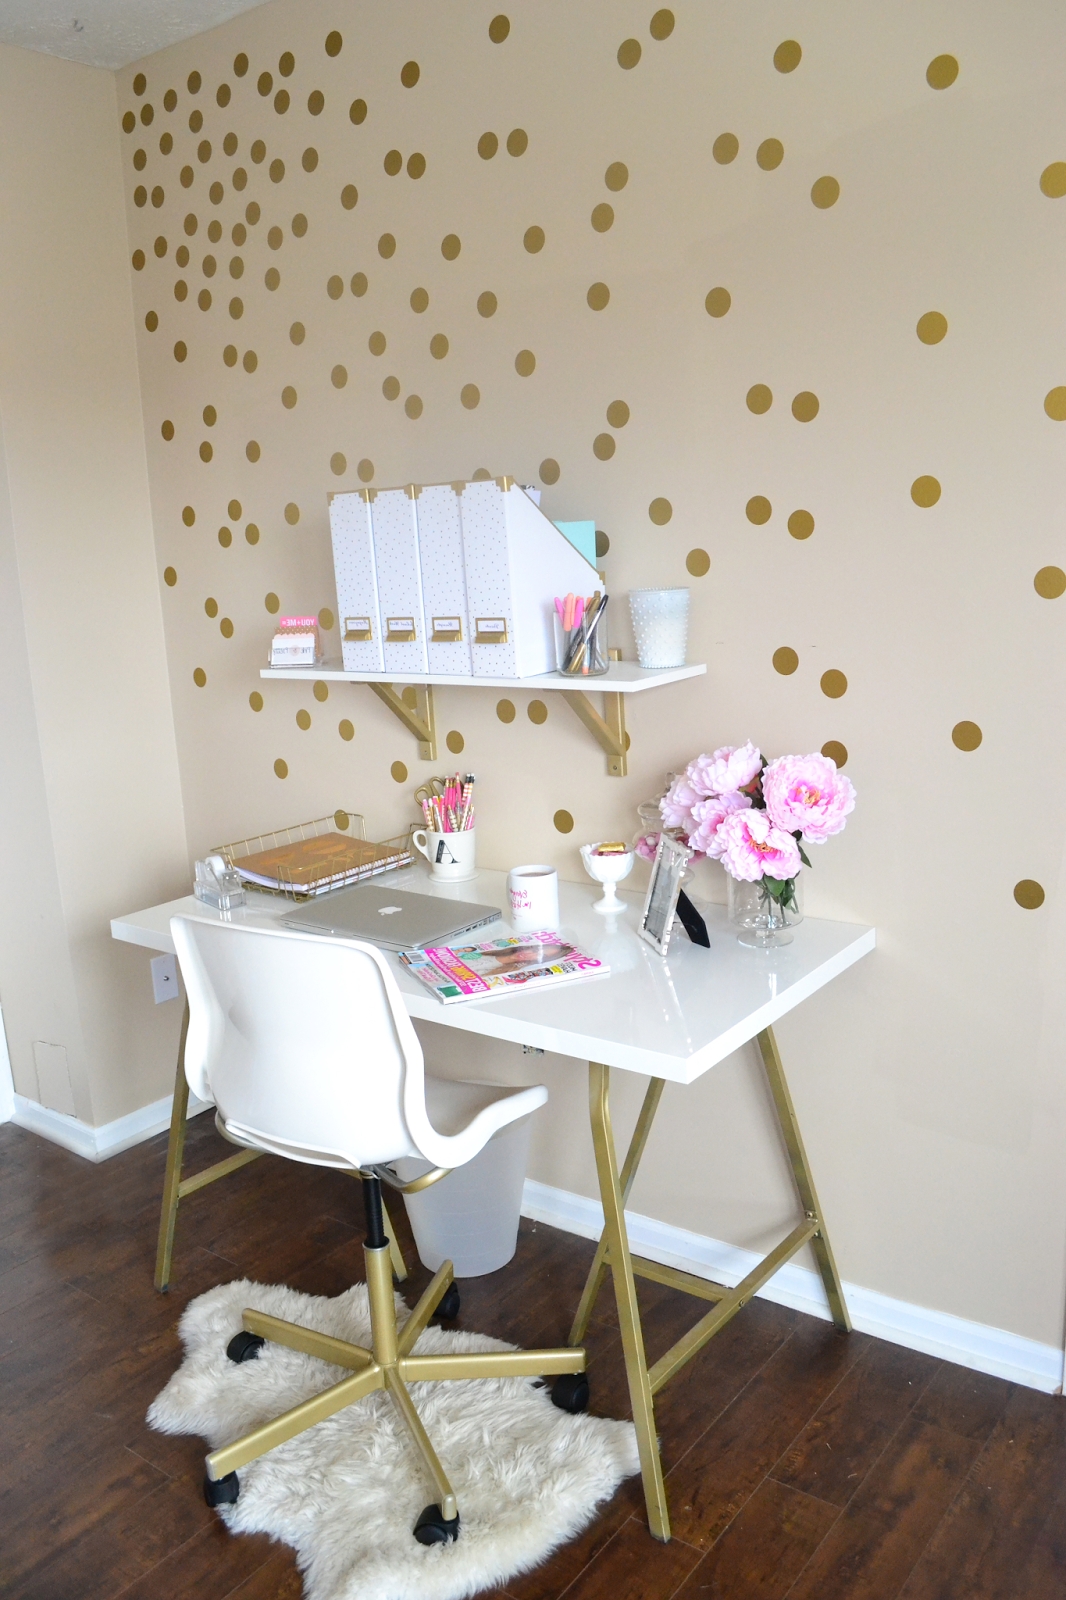 Light home office with golden polka dots